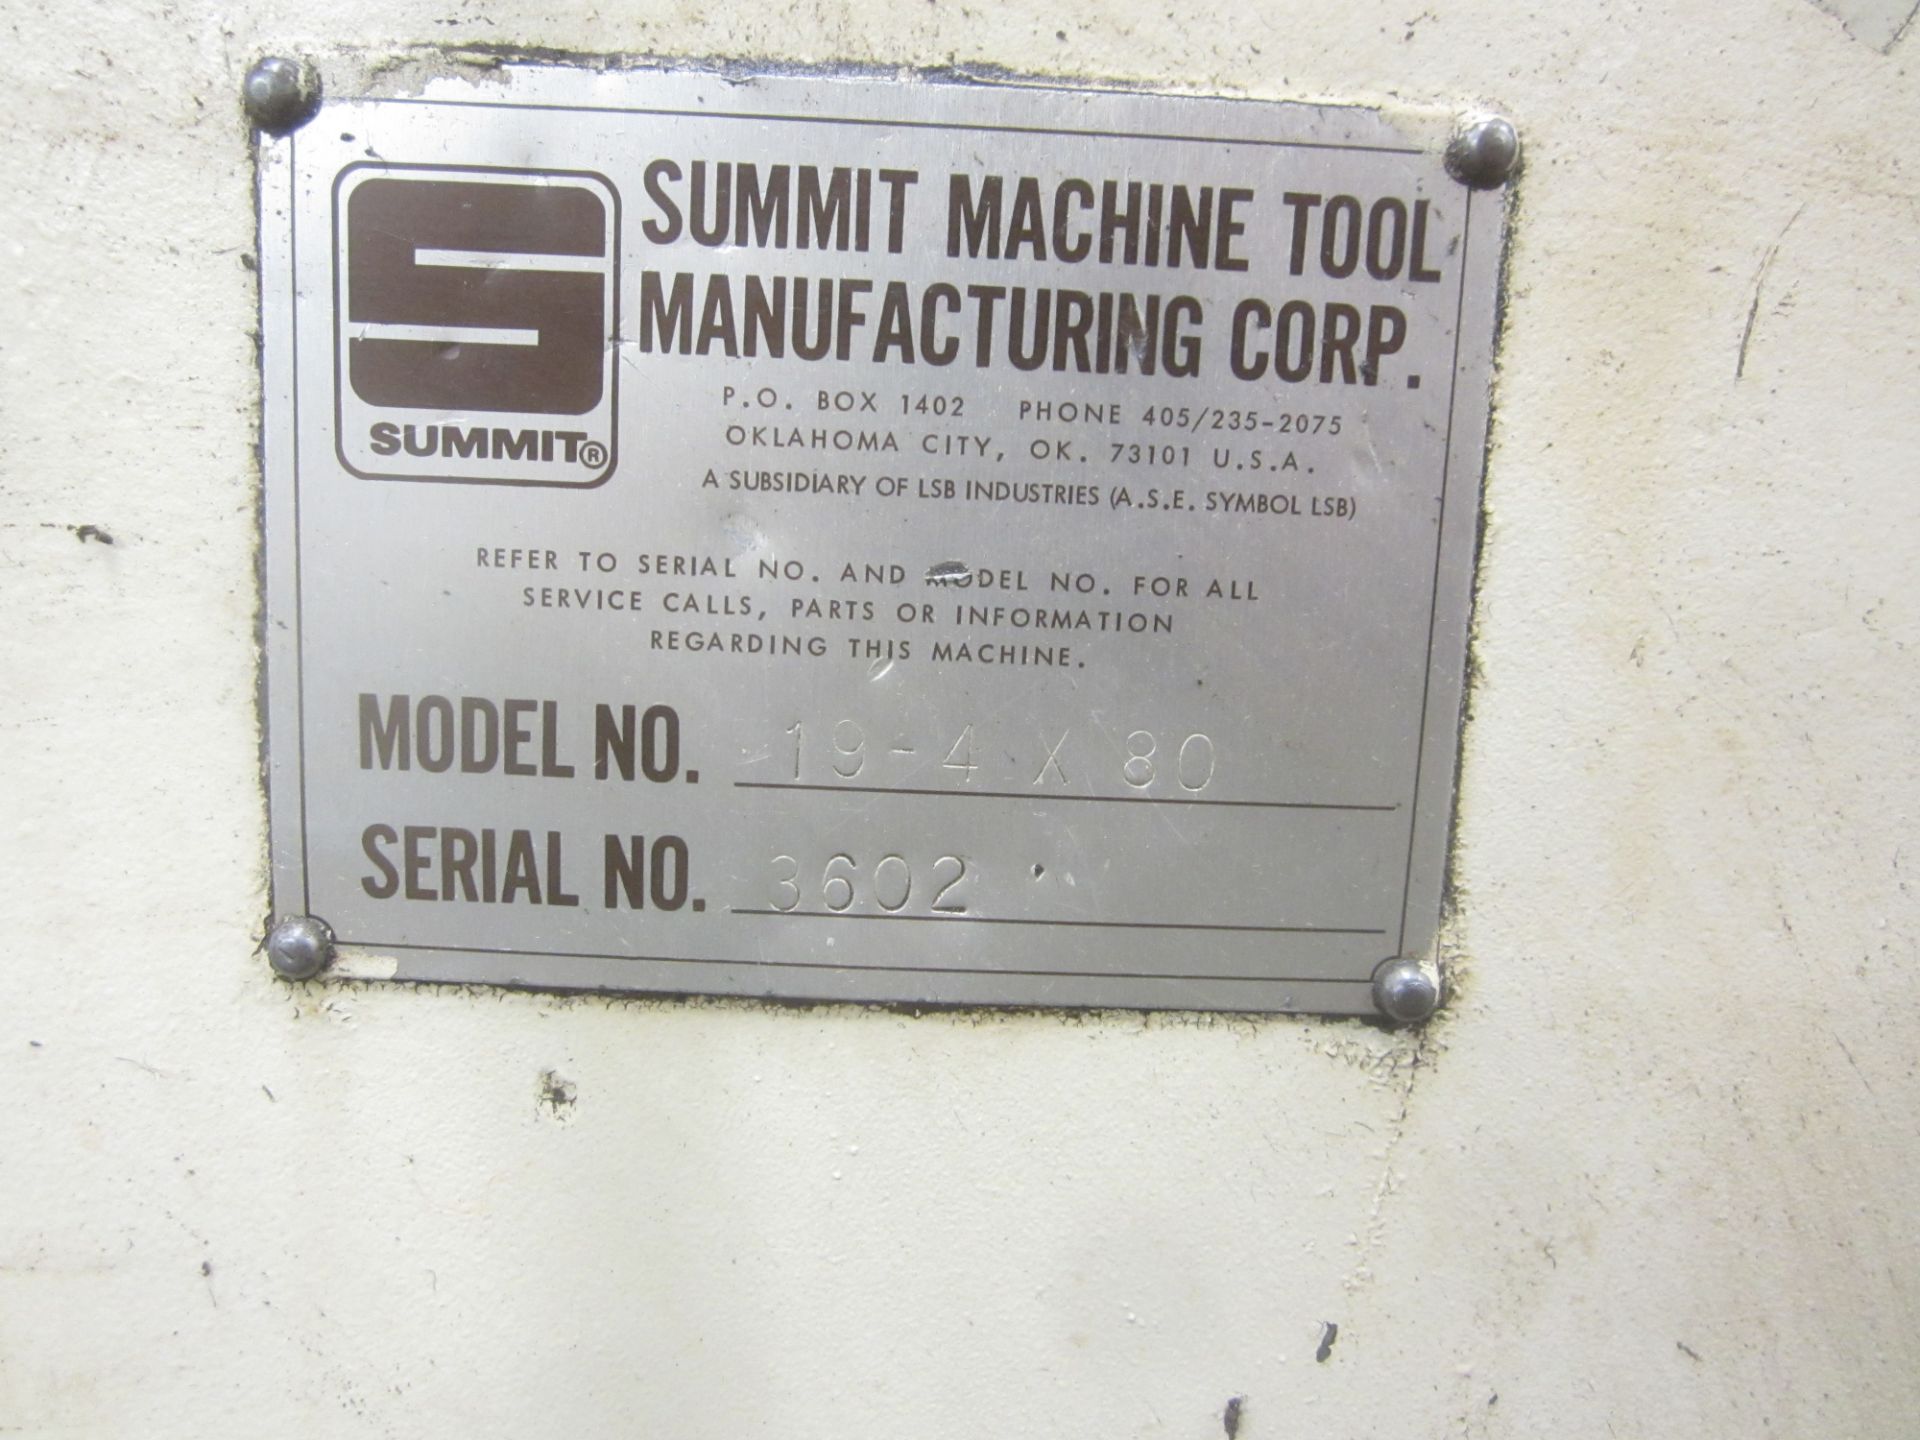 Summit Model 19-4 X 80 Toolroom Lathe, s/n 3602, 19" X 80" Capacity, 4" Spindle Hole, Inch/Metric, - Image 10 of 10